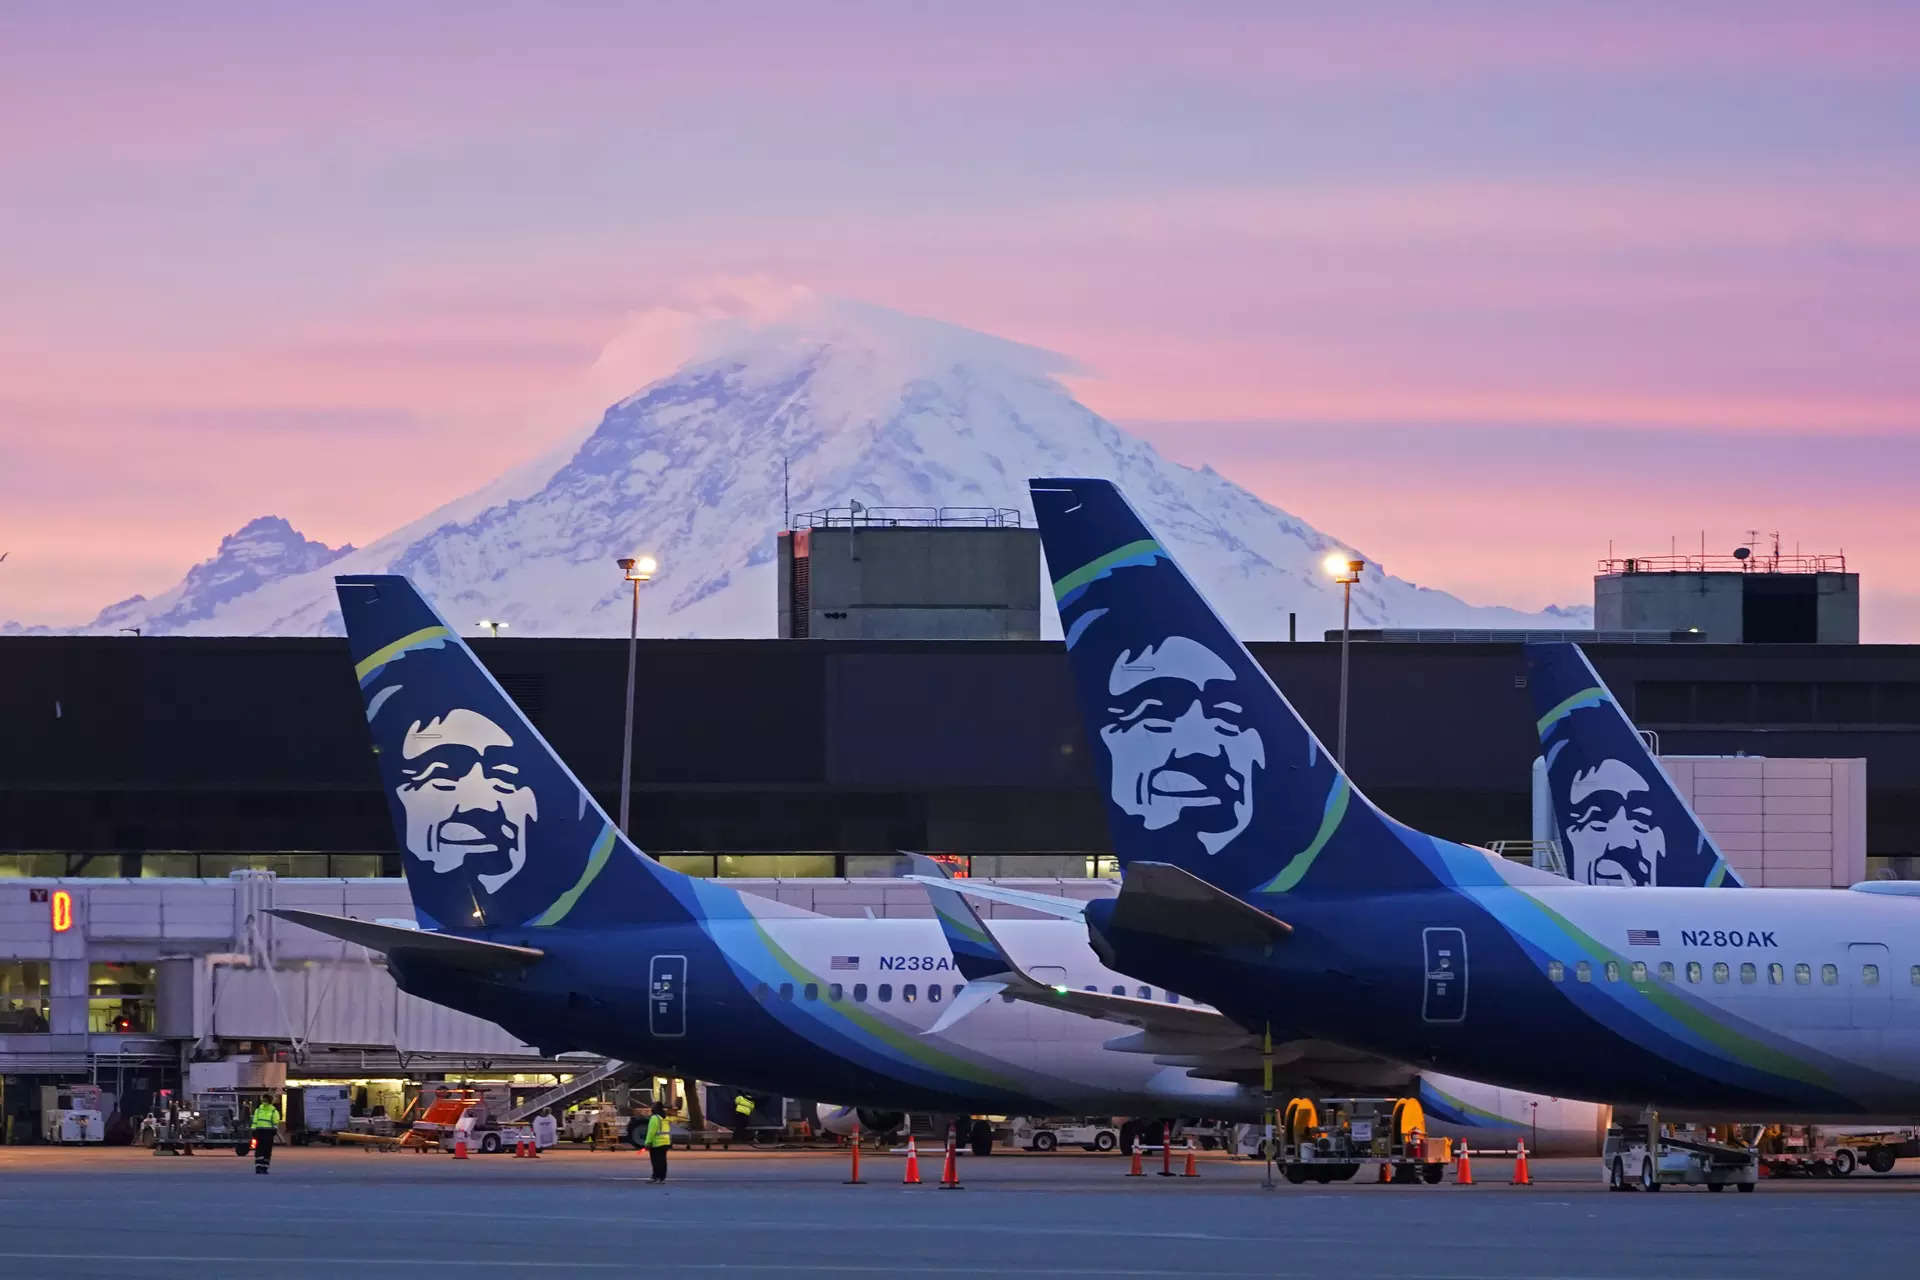 <p>FILE - Alaska Airlines planes are shown parked at gates with Mount Rainier in the background at sunrise, March 1, 2021, at Seattle-Tacoma International Airport in Seattle. Alaska Air Group said Sunday, Dec. 3, 2023, that it agreed to buy Hawaiian Airlines in a $1 billion deal. (AP Photo/Ted S. Warren, File)</p>